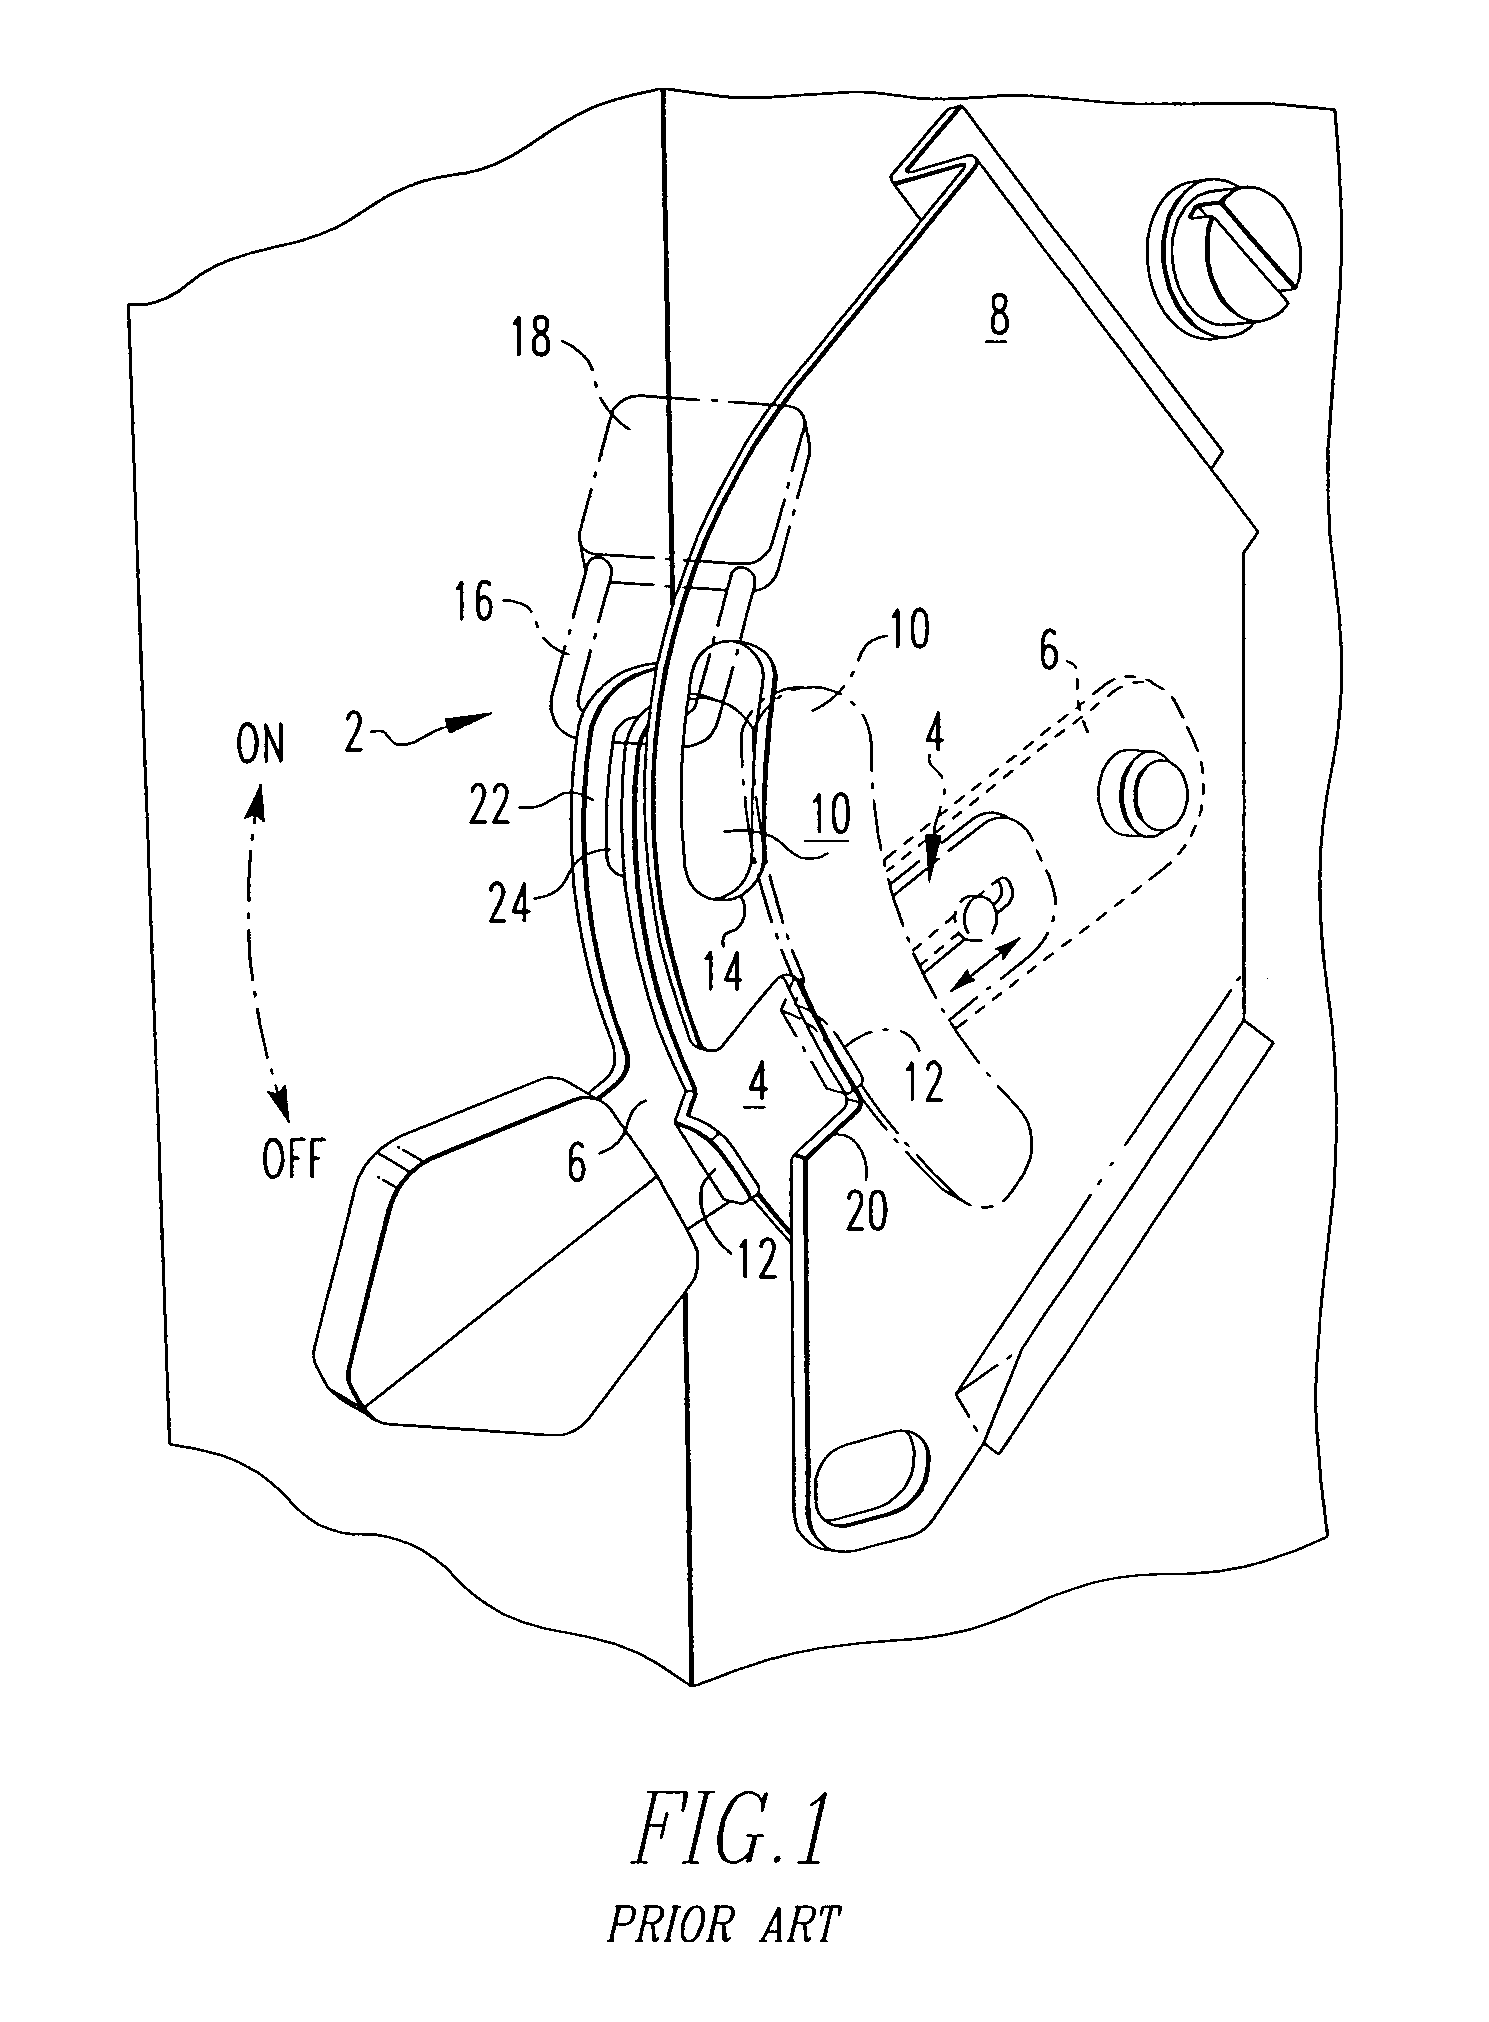 Operating handle locking assembly for an electrical switching apparatus